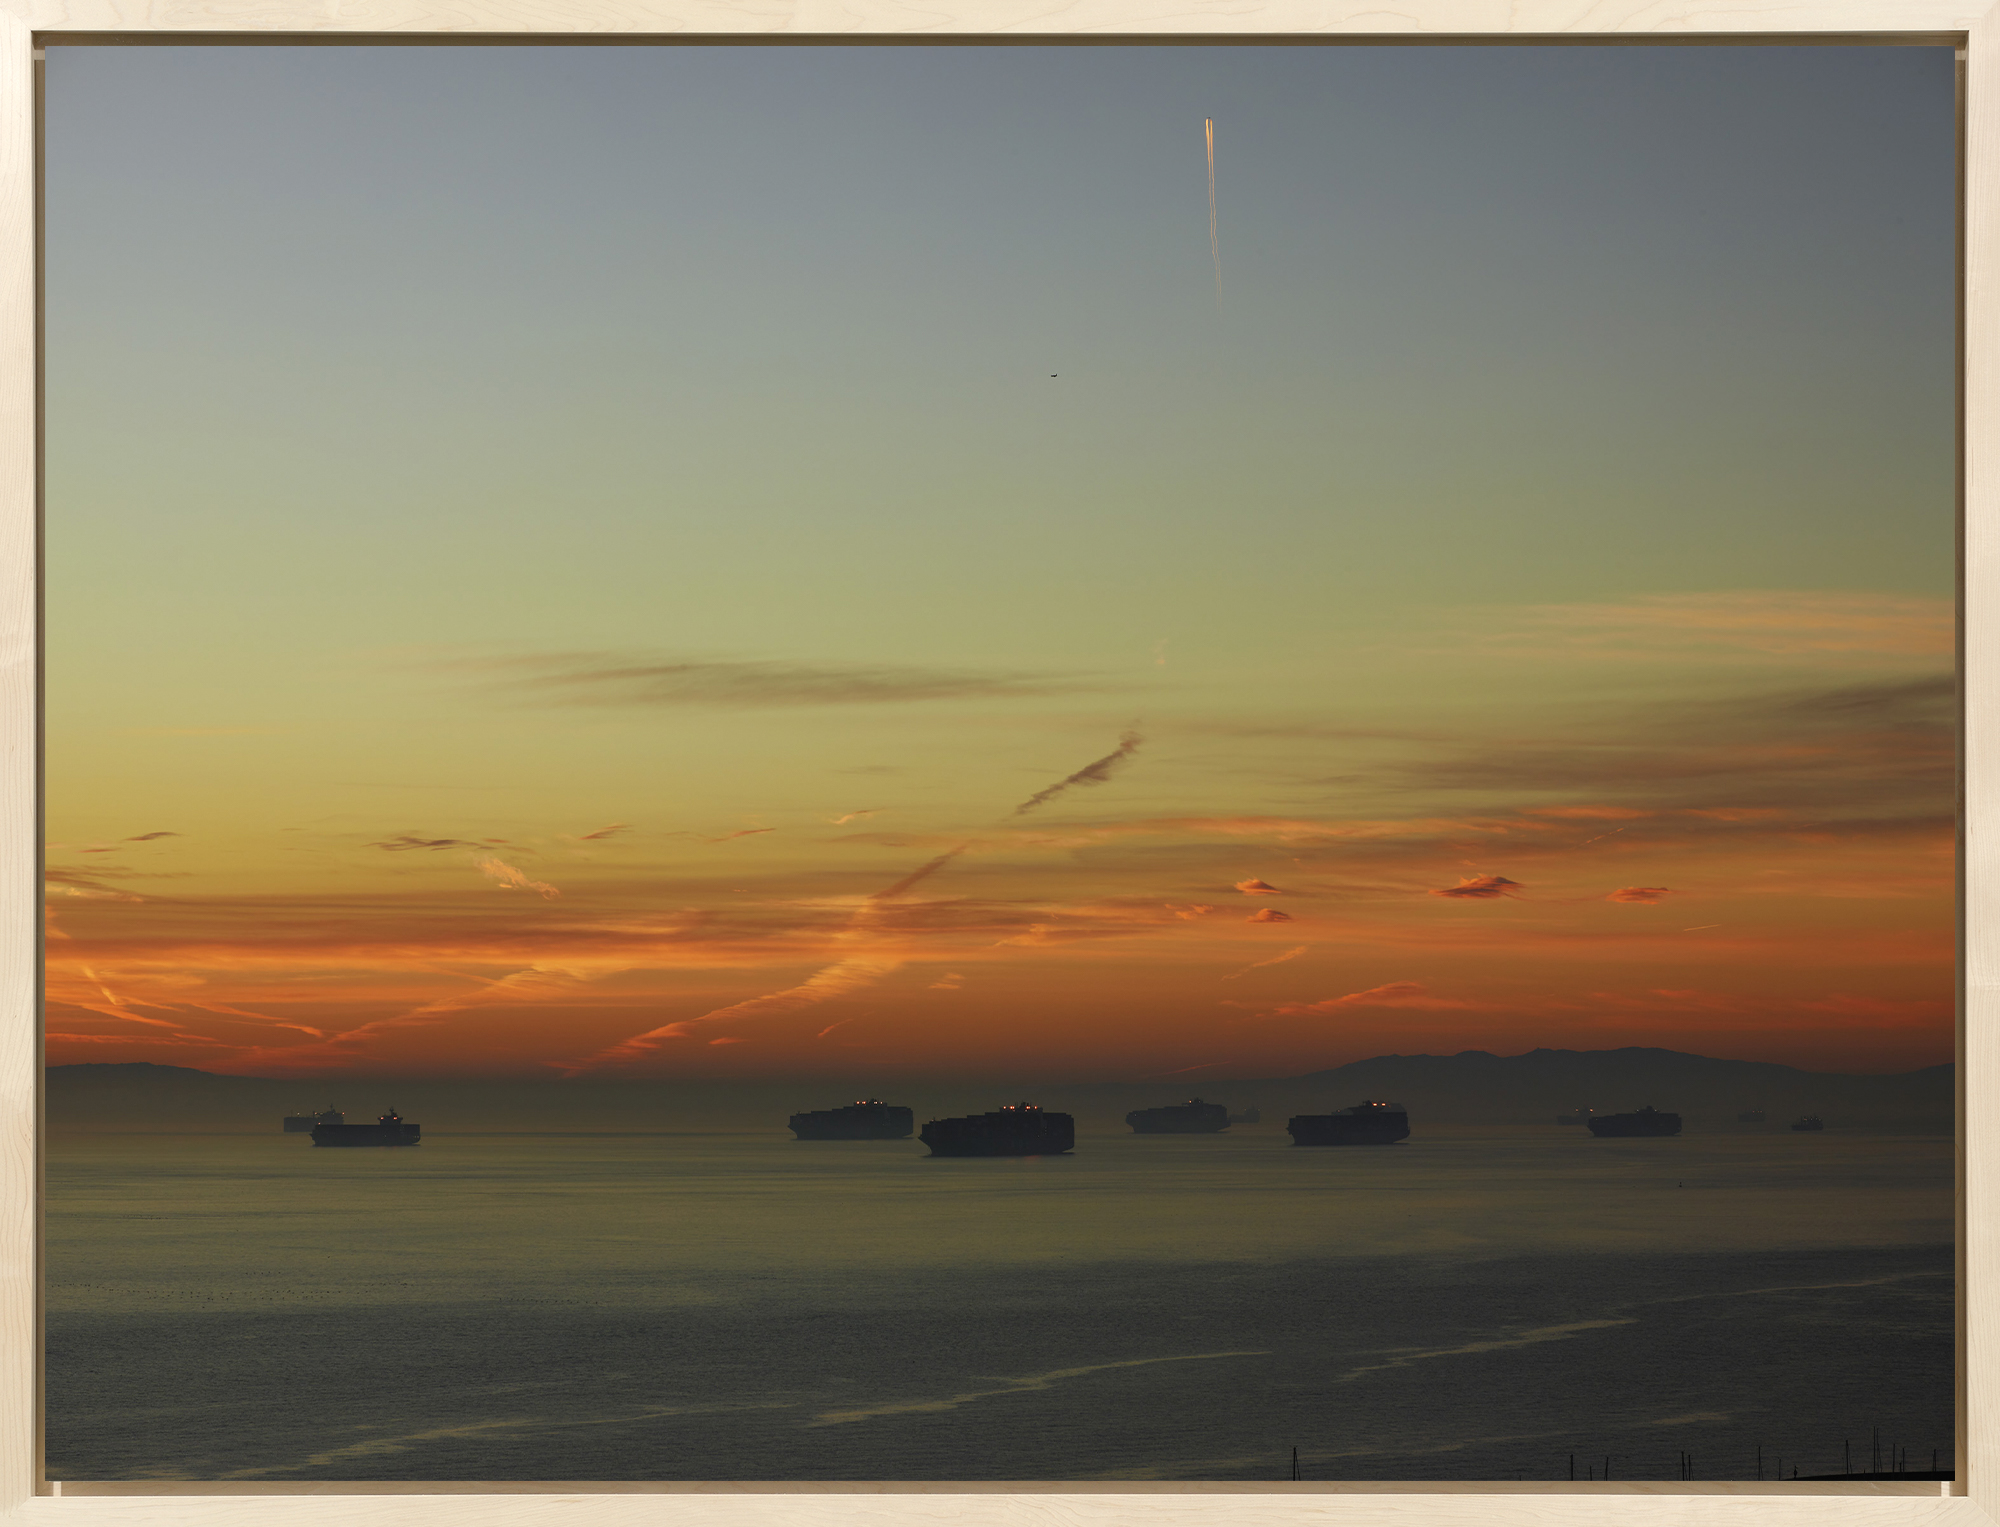 Color photograph of cargo ships traveling on water early morning framed in bleached wood